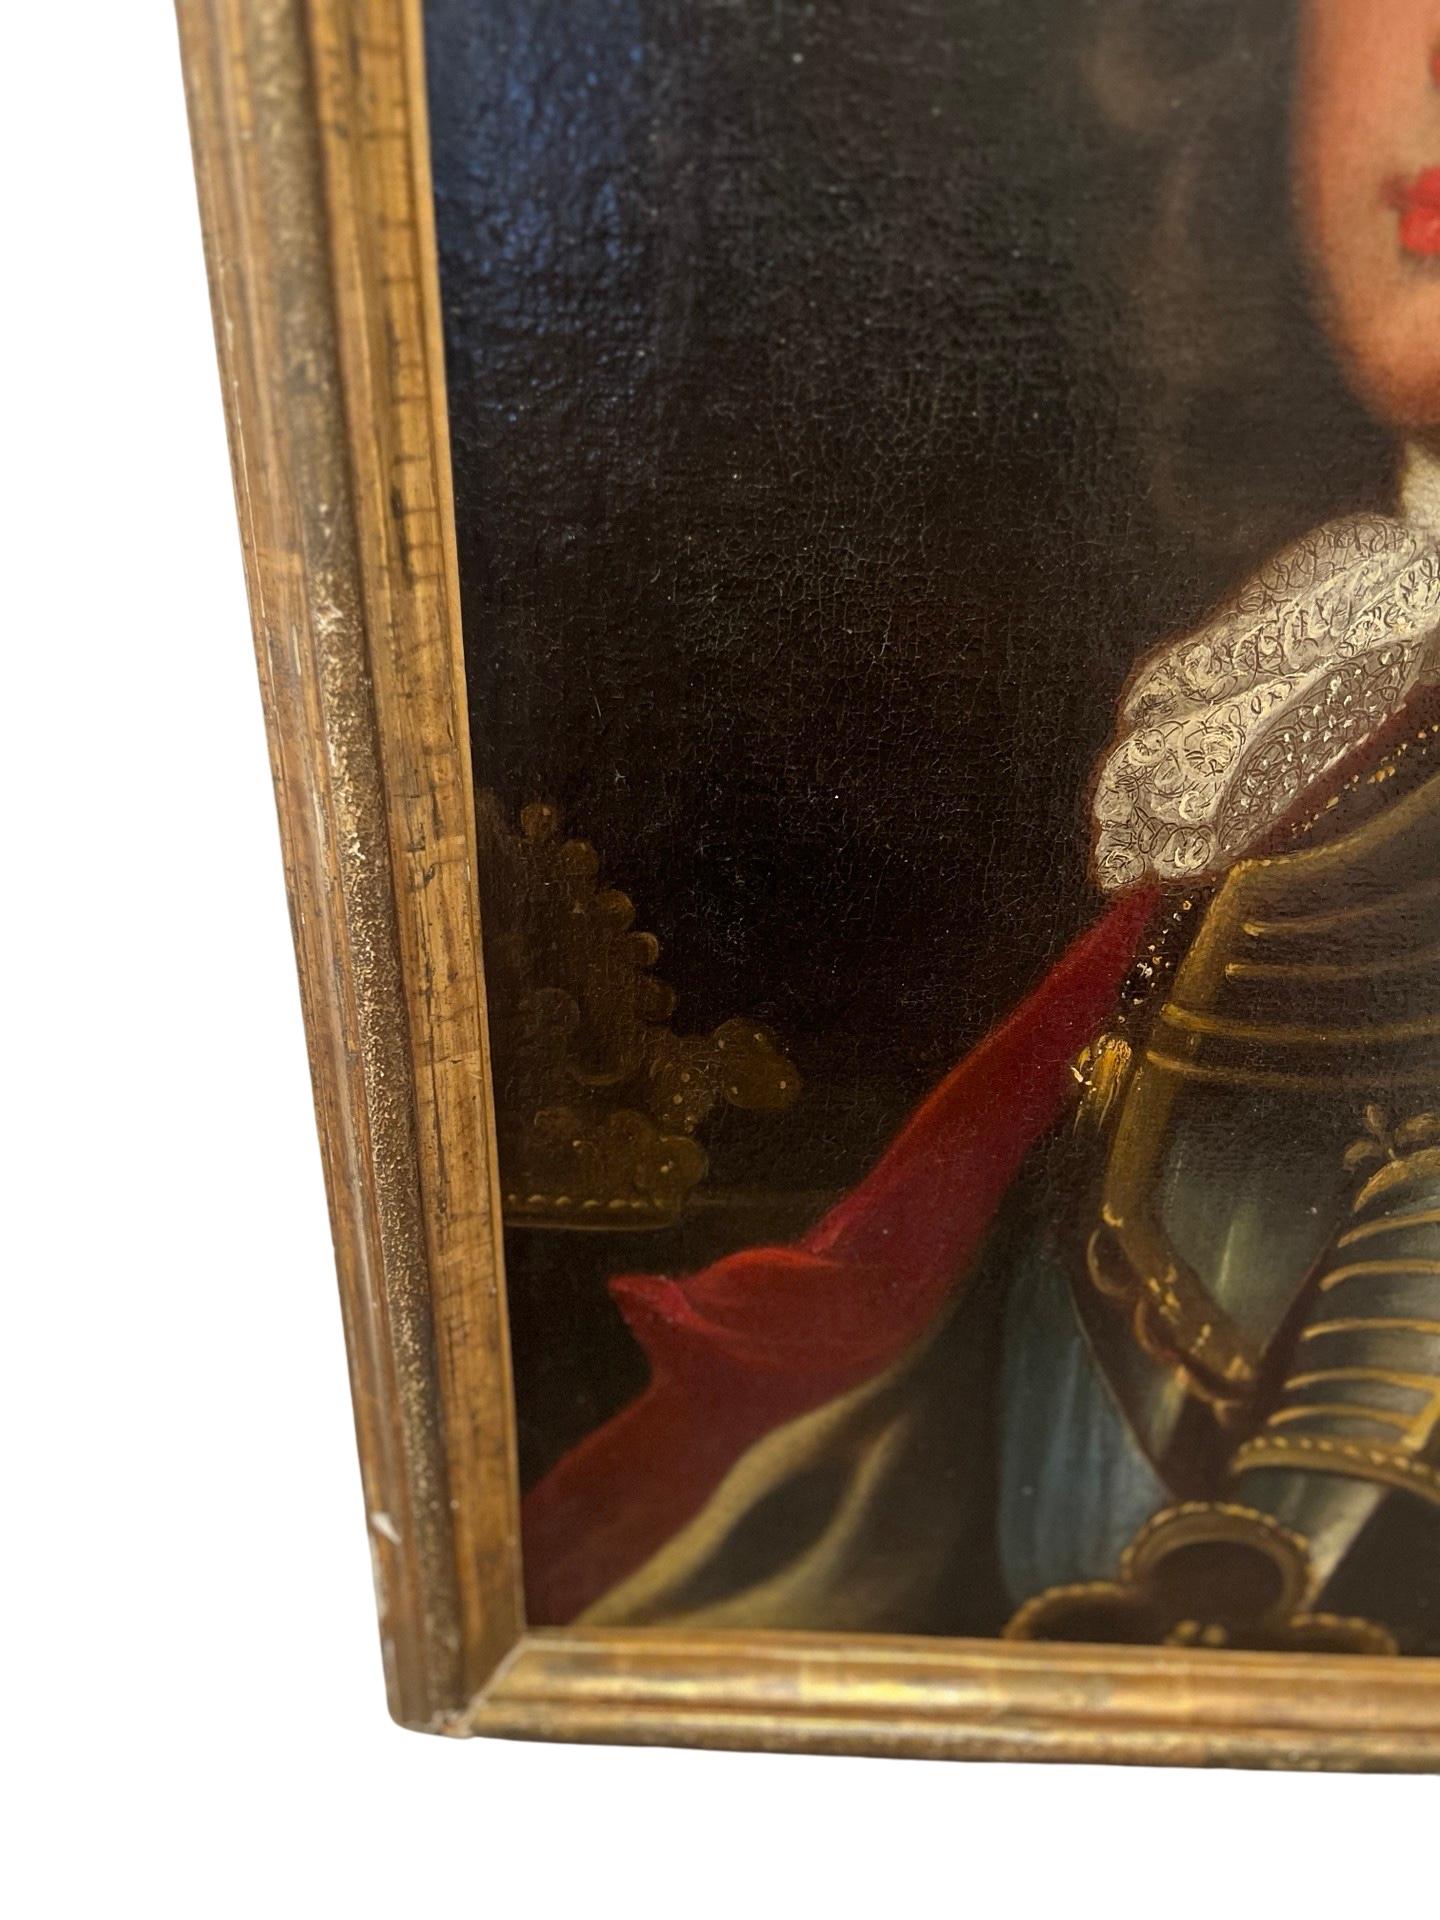 French School, 18th century. Oil on Canvas painting set in an antique giltwood frame. Unsigned. 

An 18th century portrait painting of a young Philip V or at this time Duke of Anjou. He was dressed in important armor, having gold detailing and a